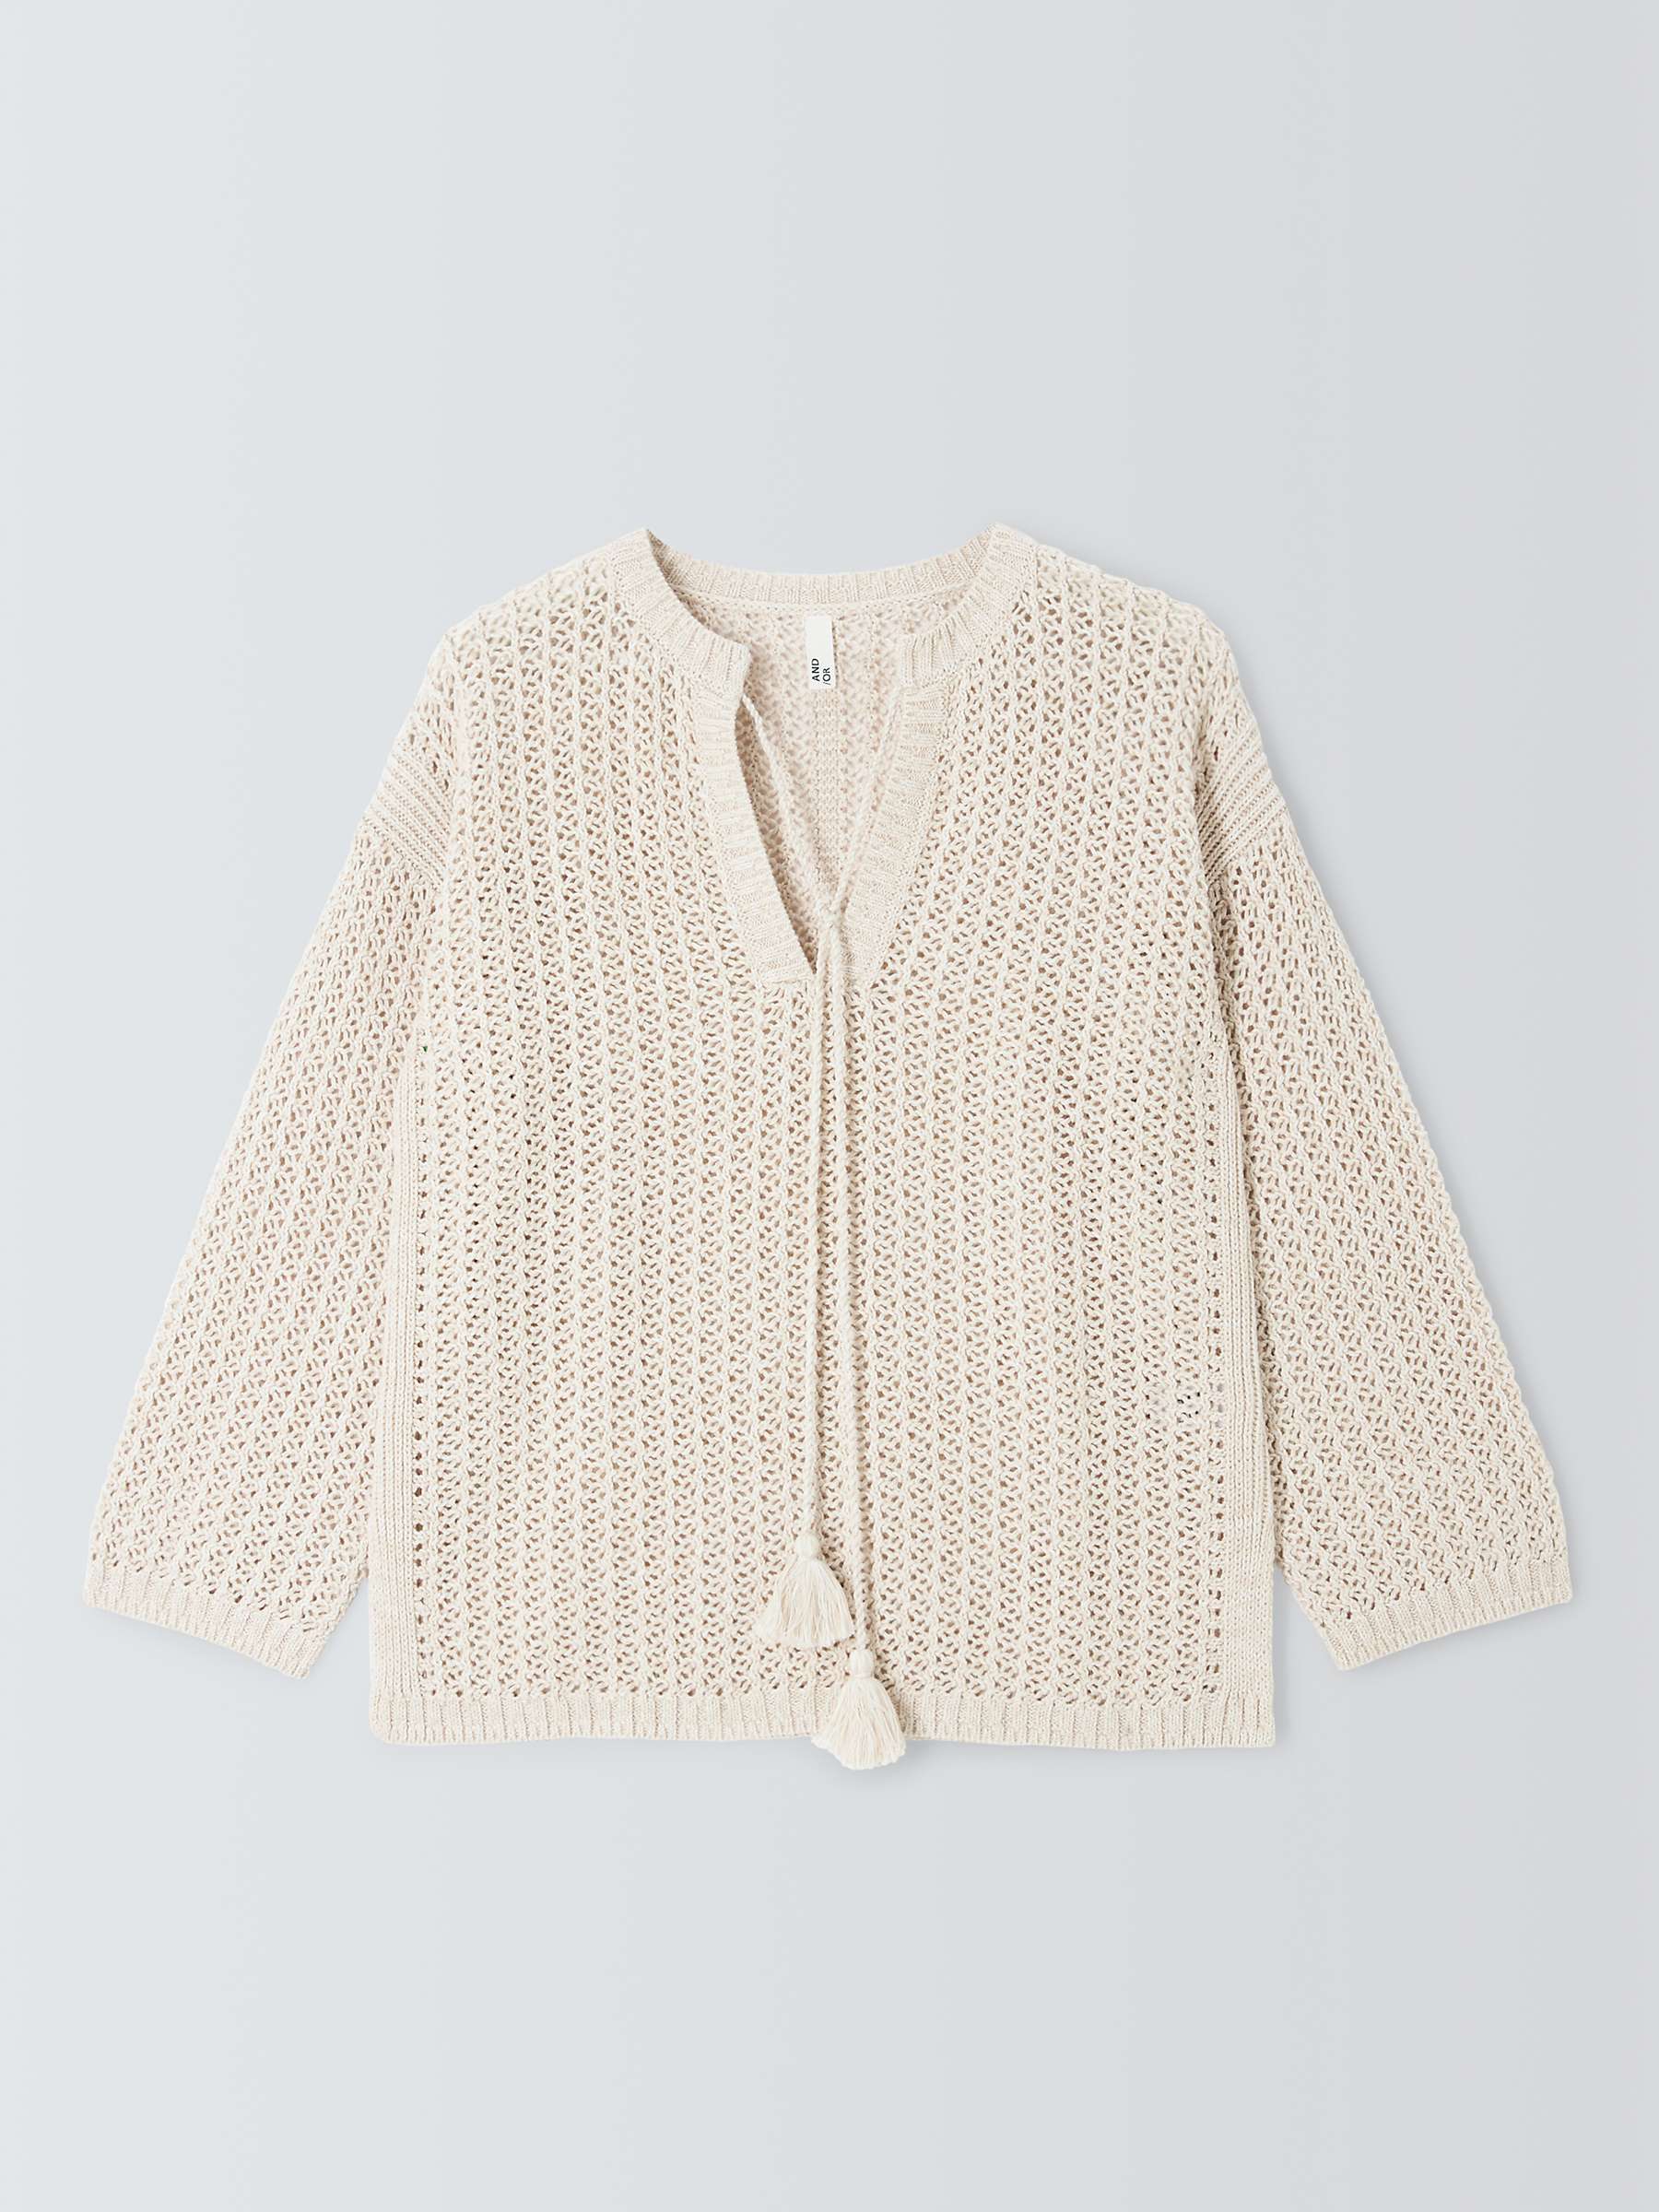 Buy AND/OR Eleanor Open Stitch Tunic Jumper, Cream Online at johnlewis.com